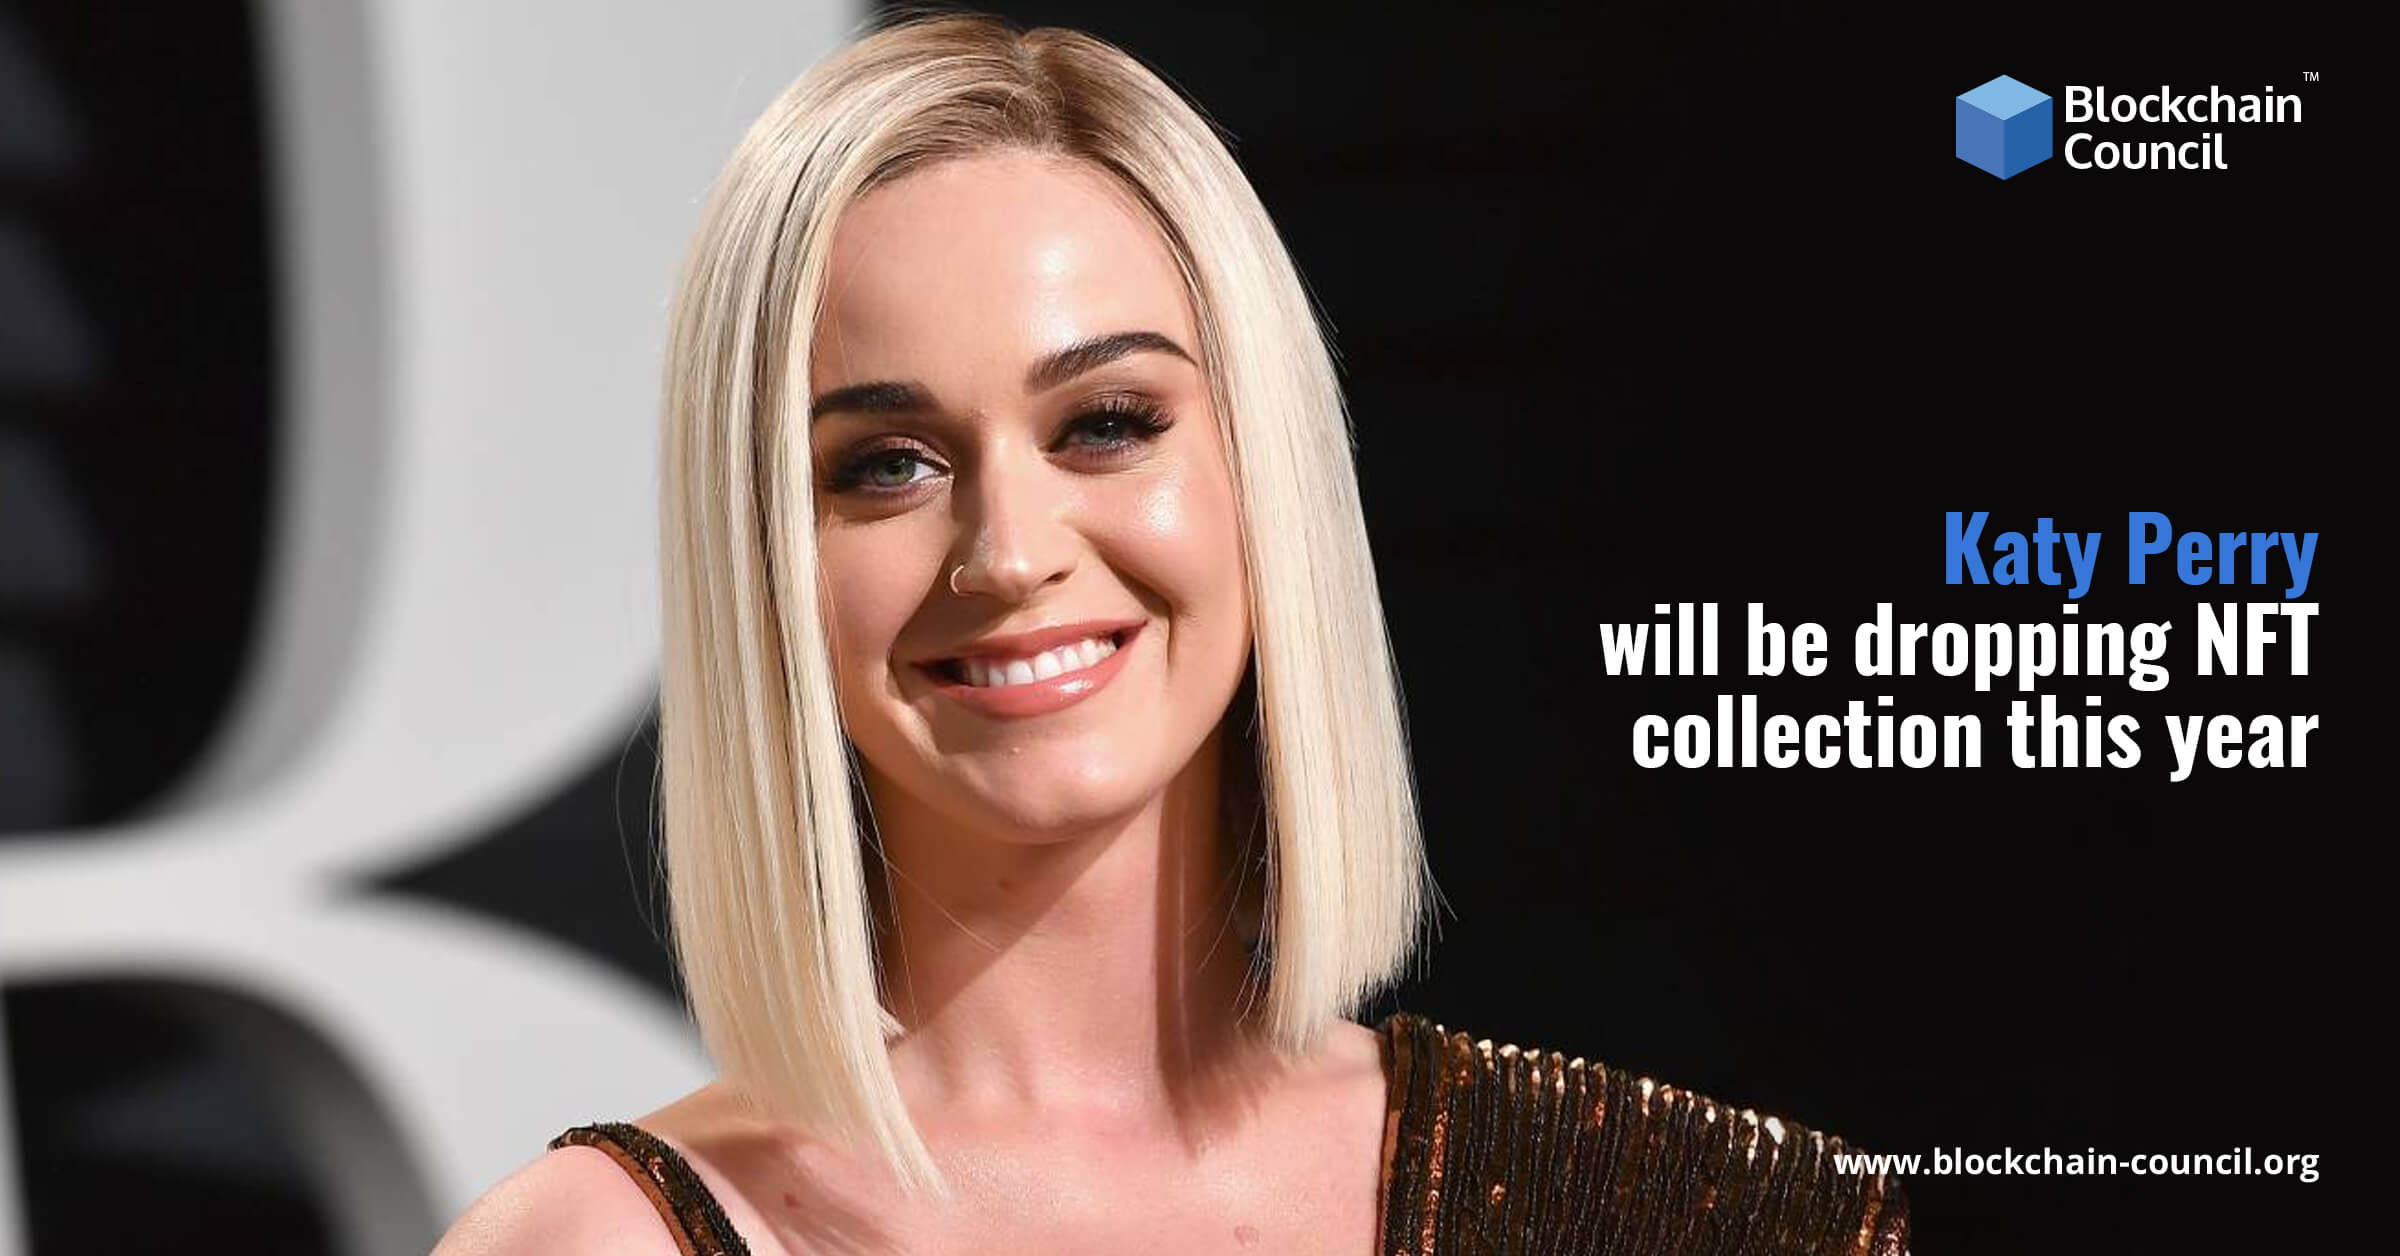 Katy Perry will be dropping NFT collection this year